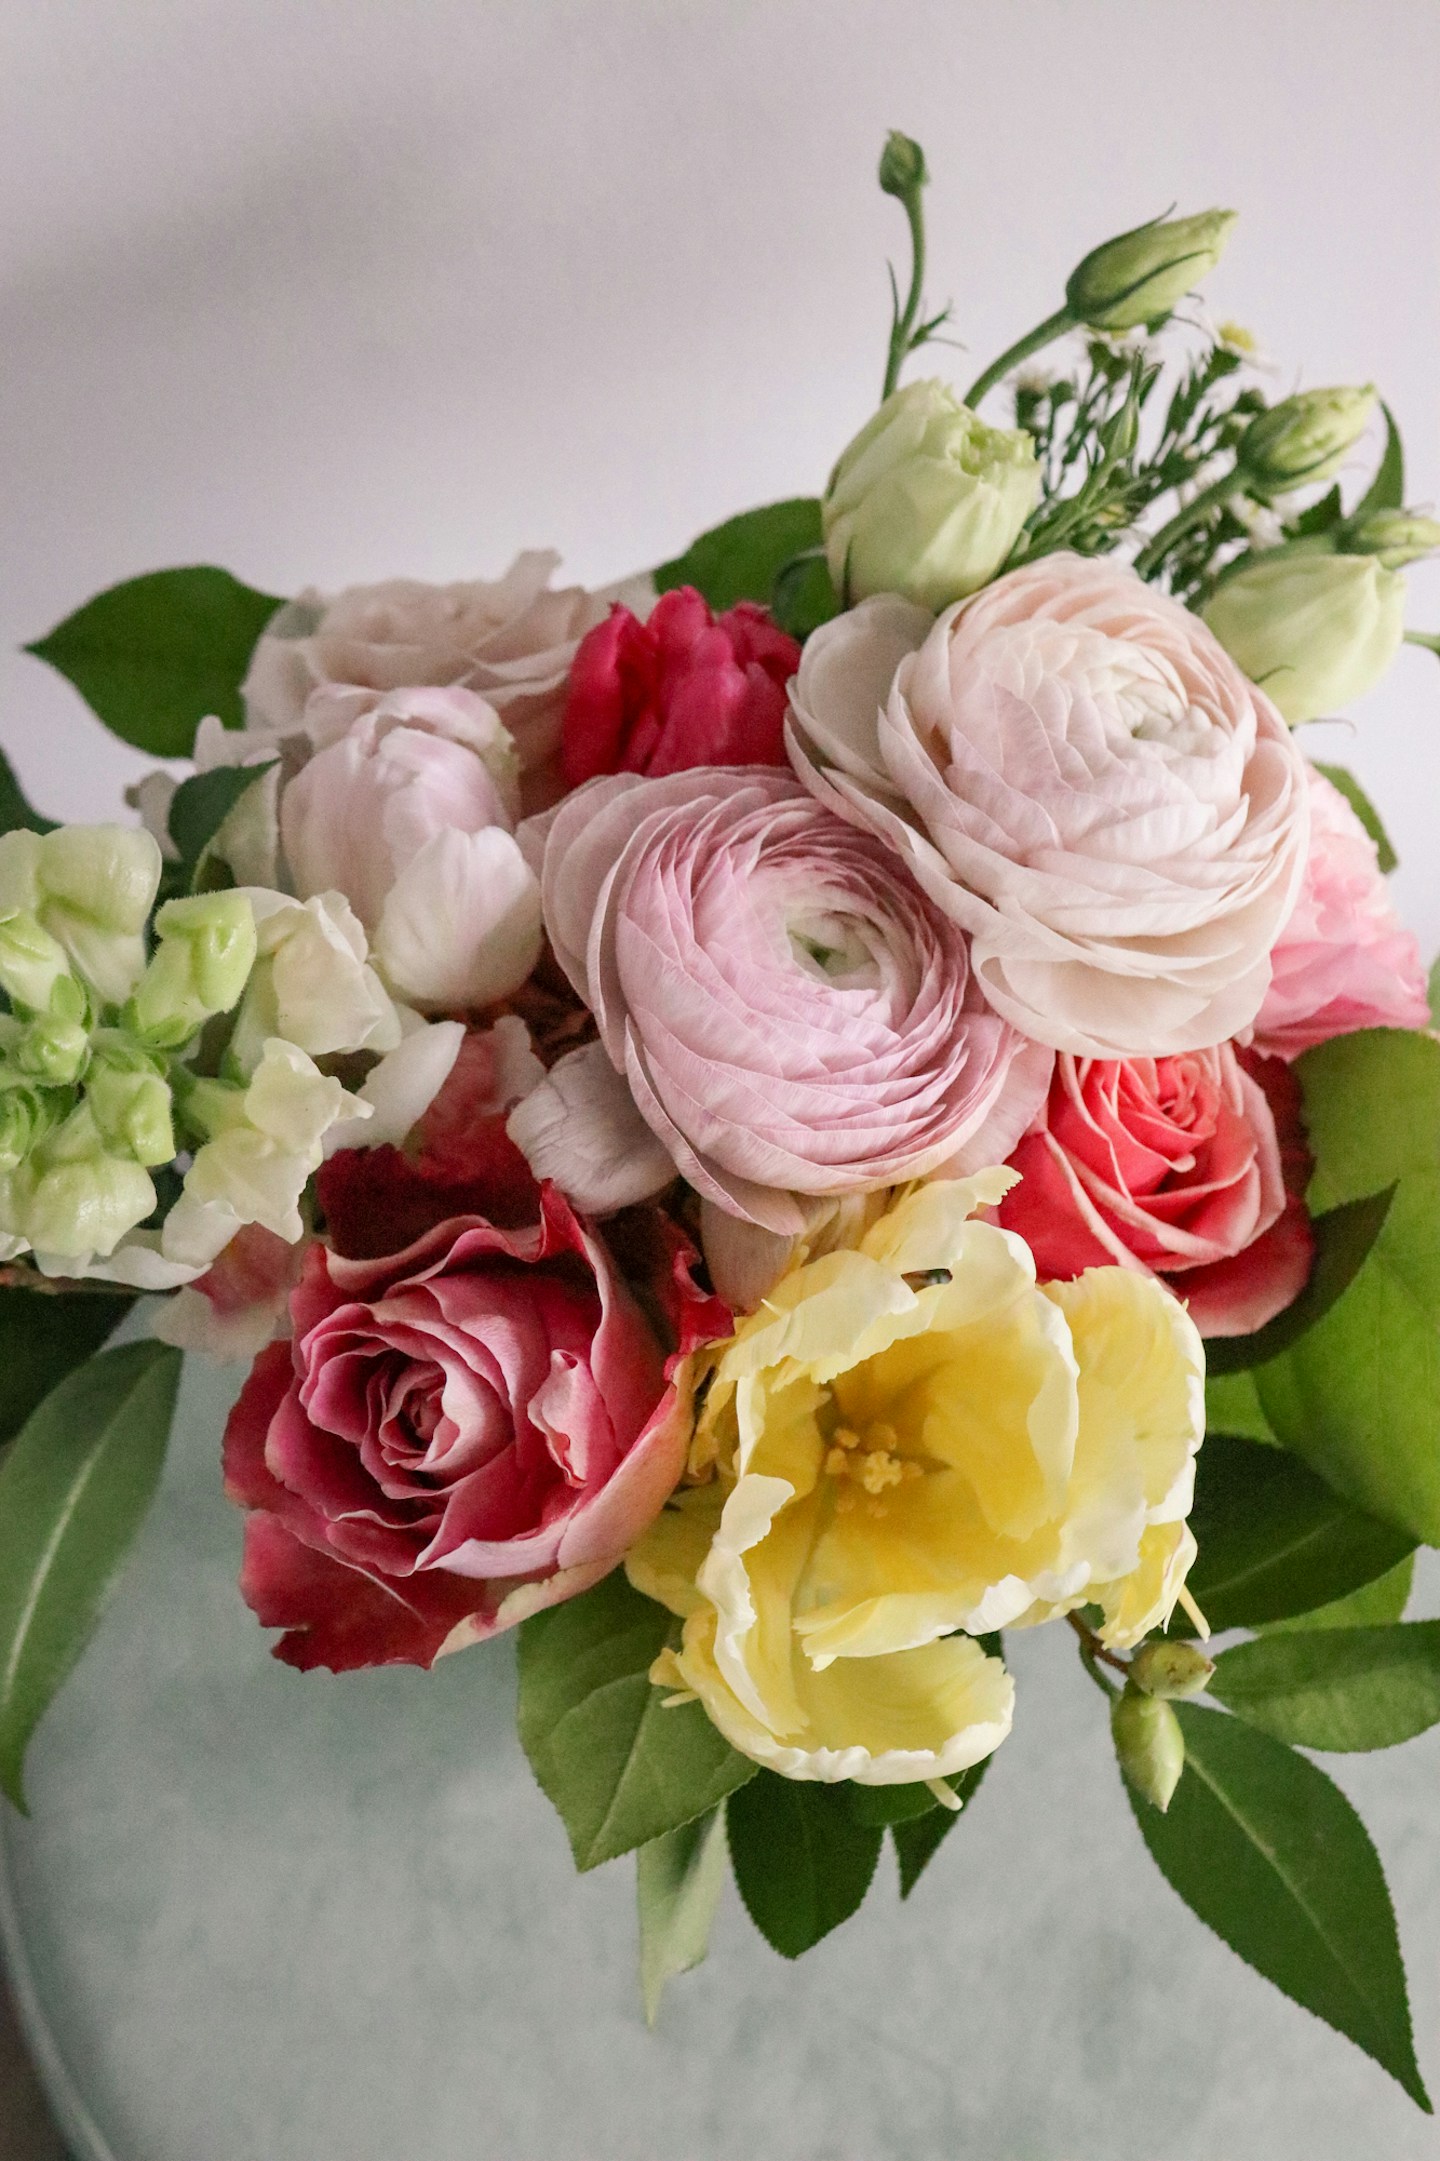 Brave Blooms Floral Subscription is a perfect mother's day gift idea!